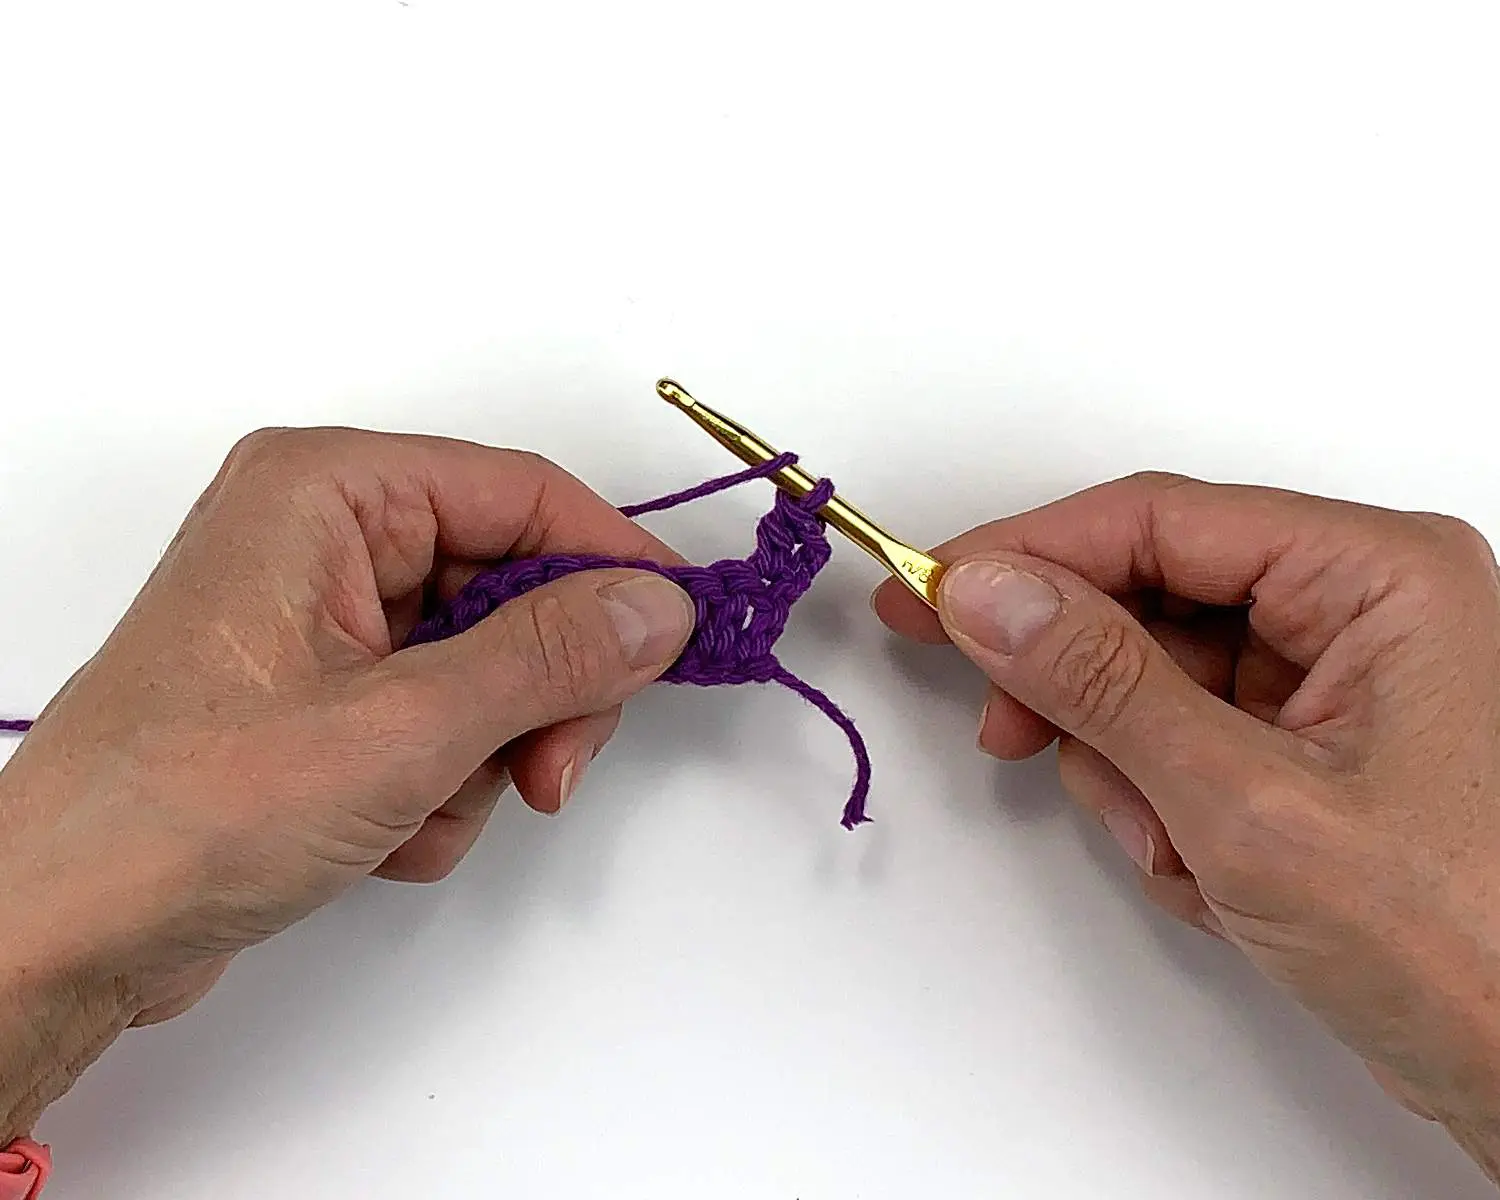 image of hands making a crochet yarn over